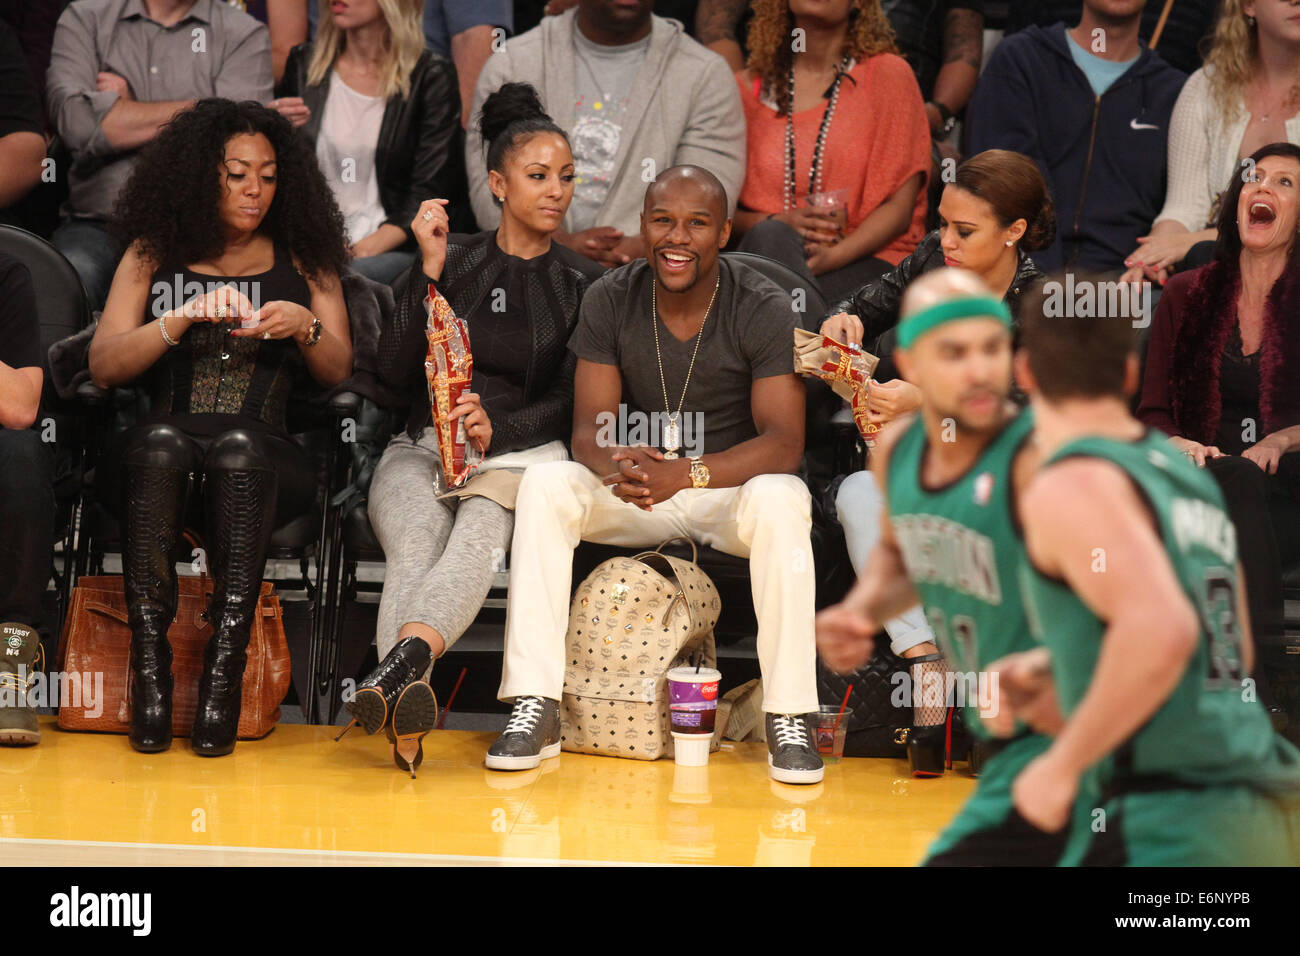 Floyd Mayweather Was Spotted At The Lakers Game With This Exotic